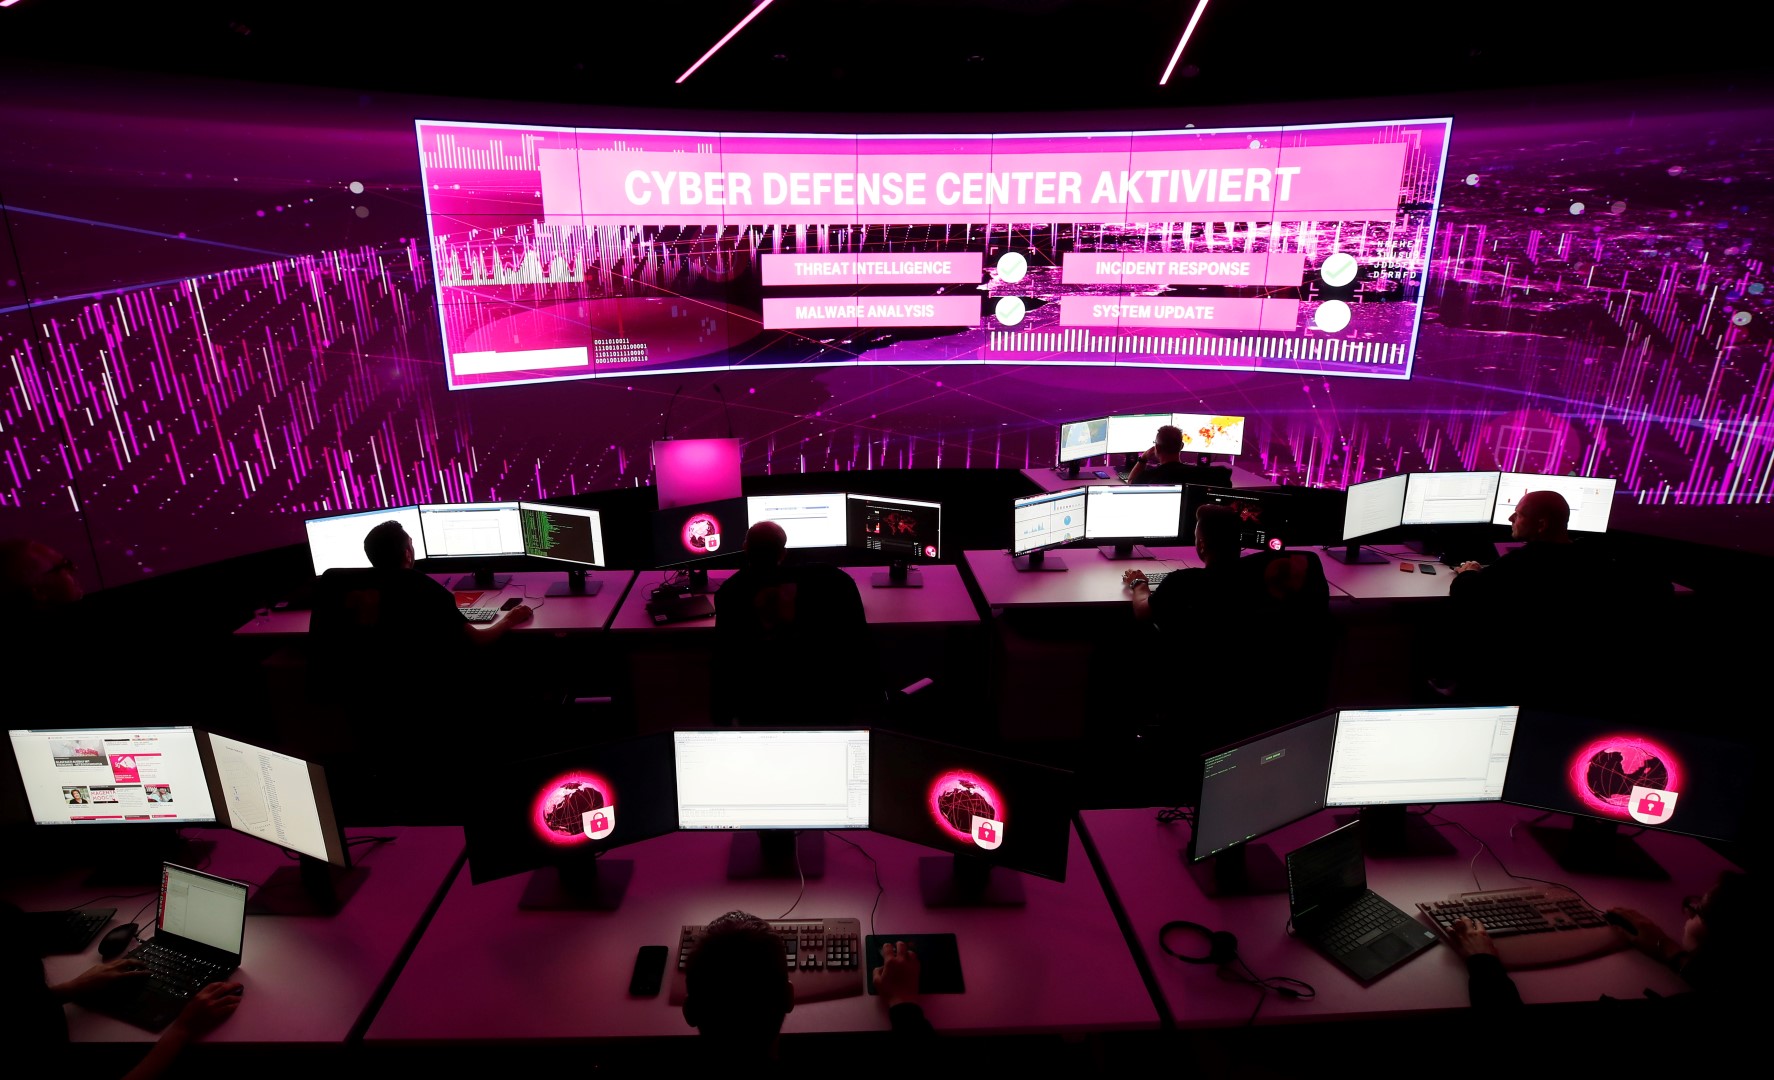 A general view shows Europe's largest and newly opened integrated Cyber Defense and Security Operation Center (SOC) of Telekom Security, a business unit of Germany's telecommunications giant Deutsche Telekom AG, in Bonn October 26, 2017. REUTERS/Wolfgang Rattay - RC1C23B34550